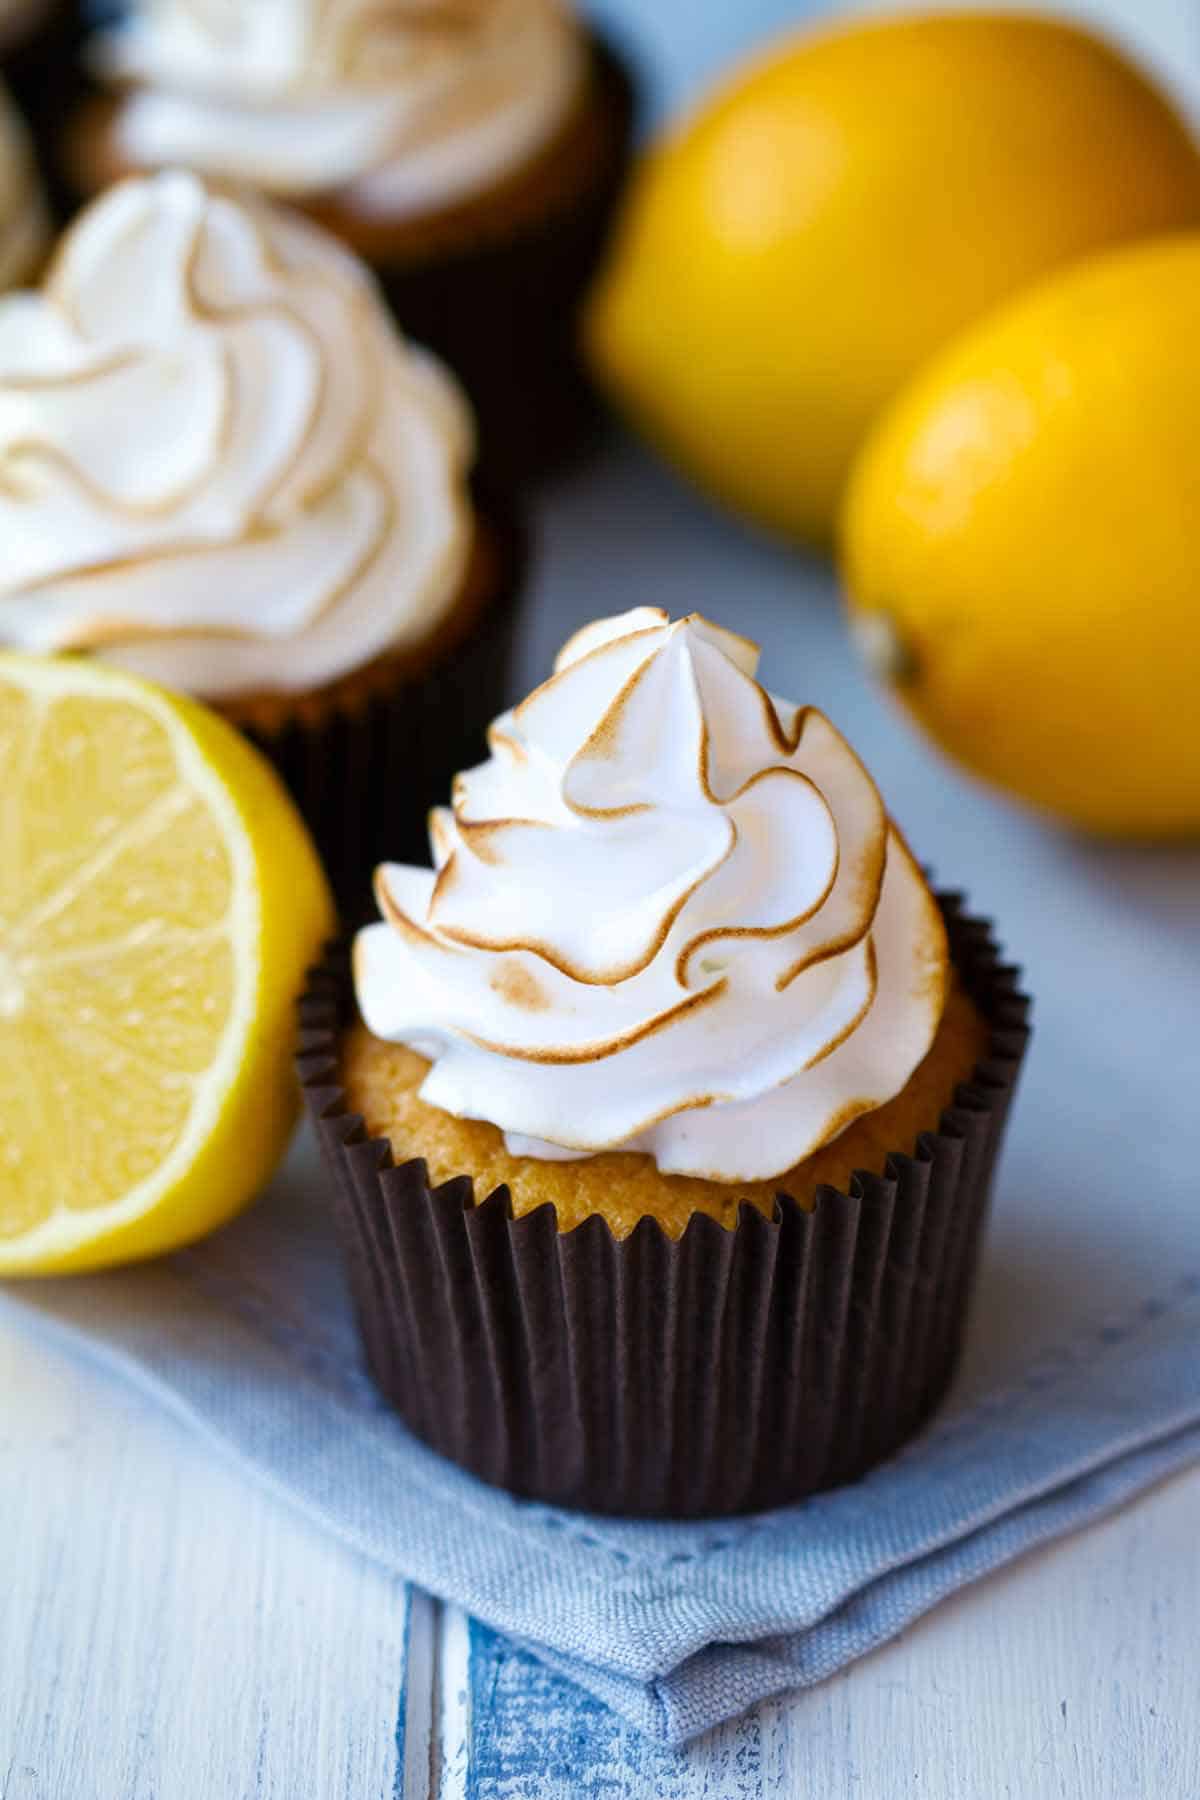 Lemon cupcakes filled with coconut filling with a meringue topping on top.